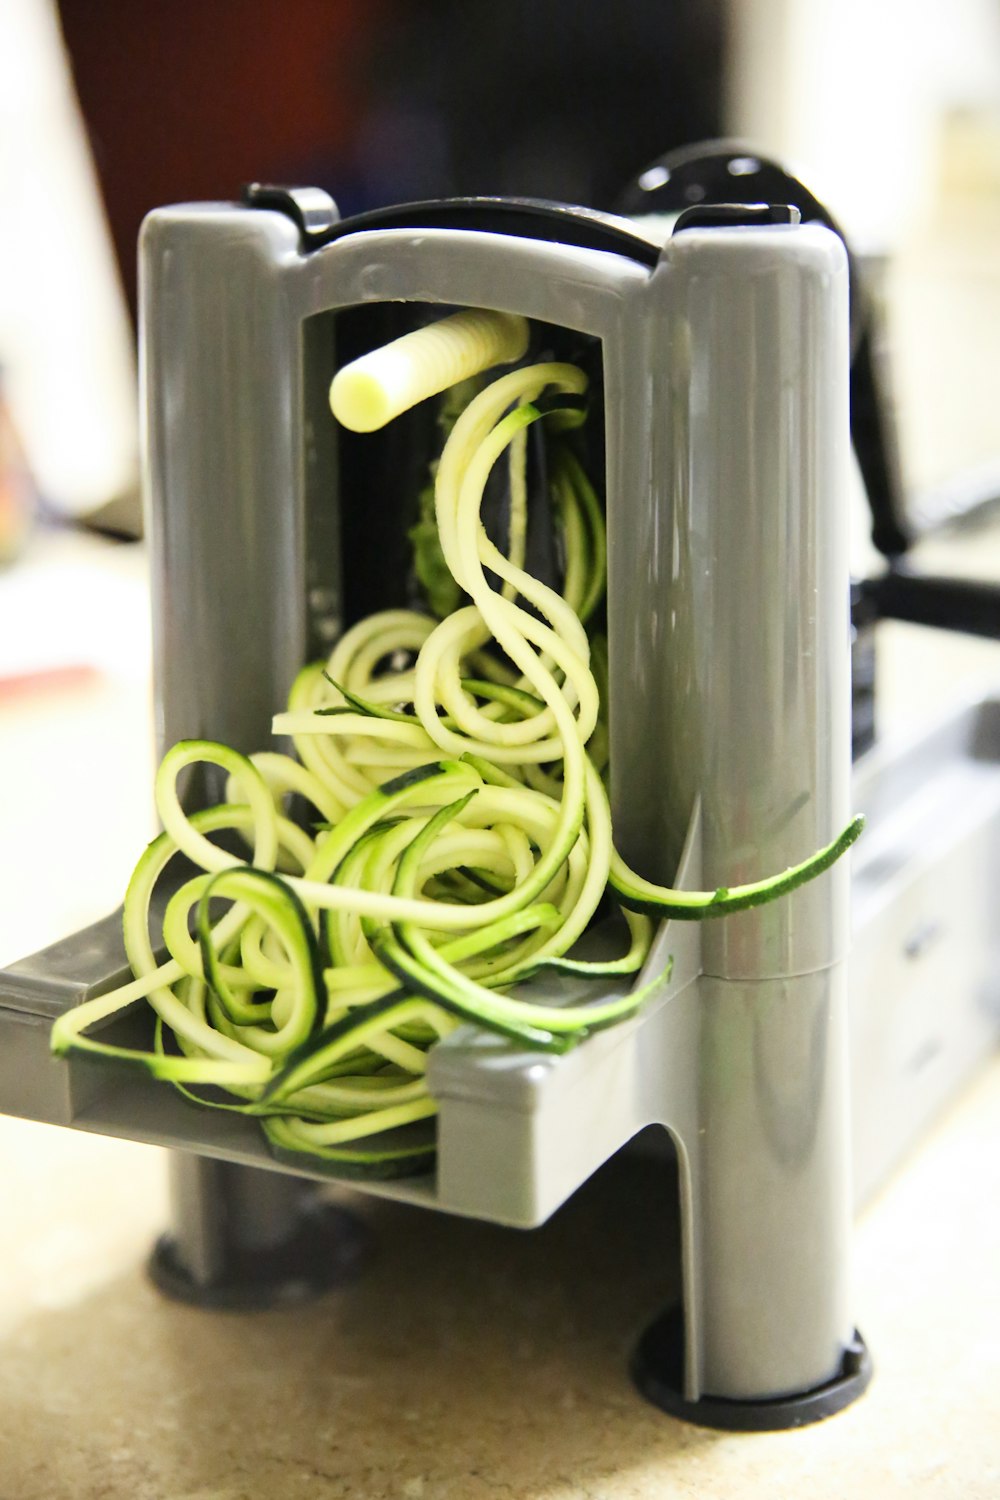 green rubber band on black device, zucchini